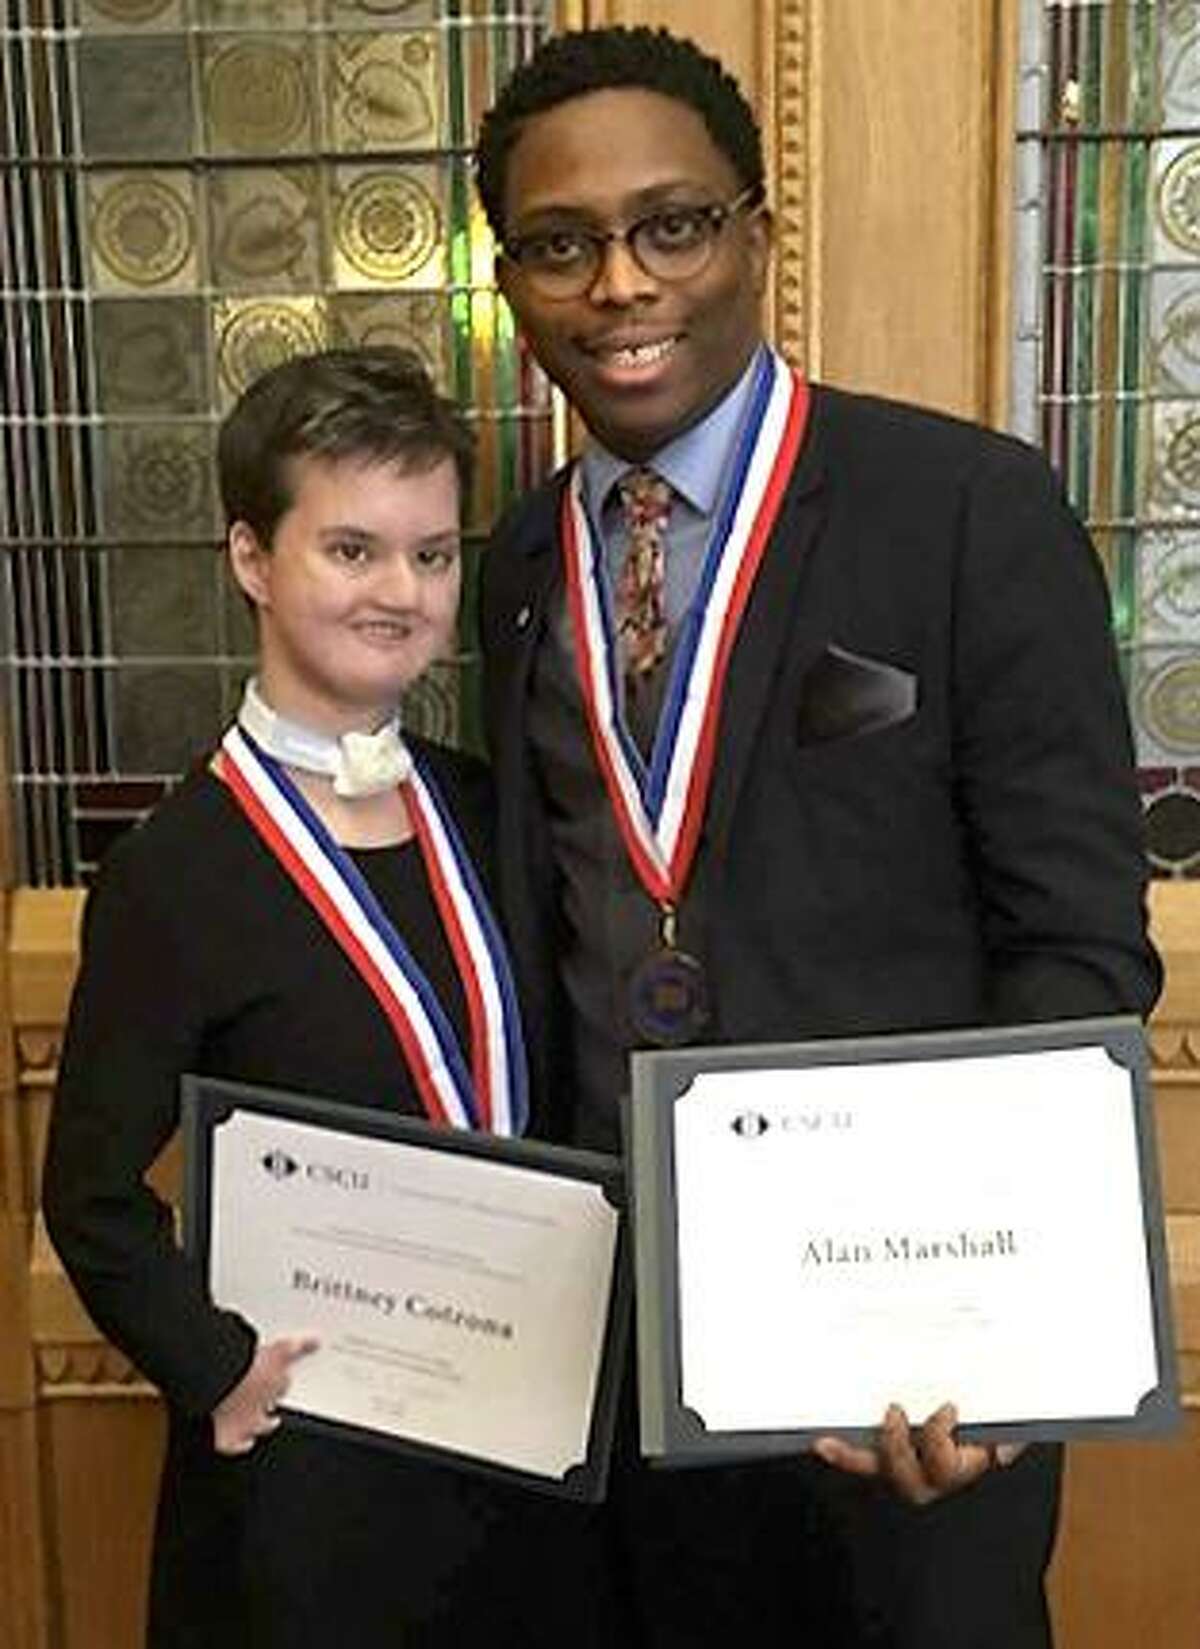 Middlesex Community College students Brittney Cotrona of Meriden, left, and Alan Marshall of Middletown were presented All-Connecticut Academic Team awards earlier this month at the state Capitol.